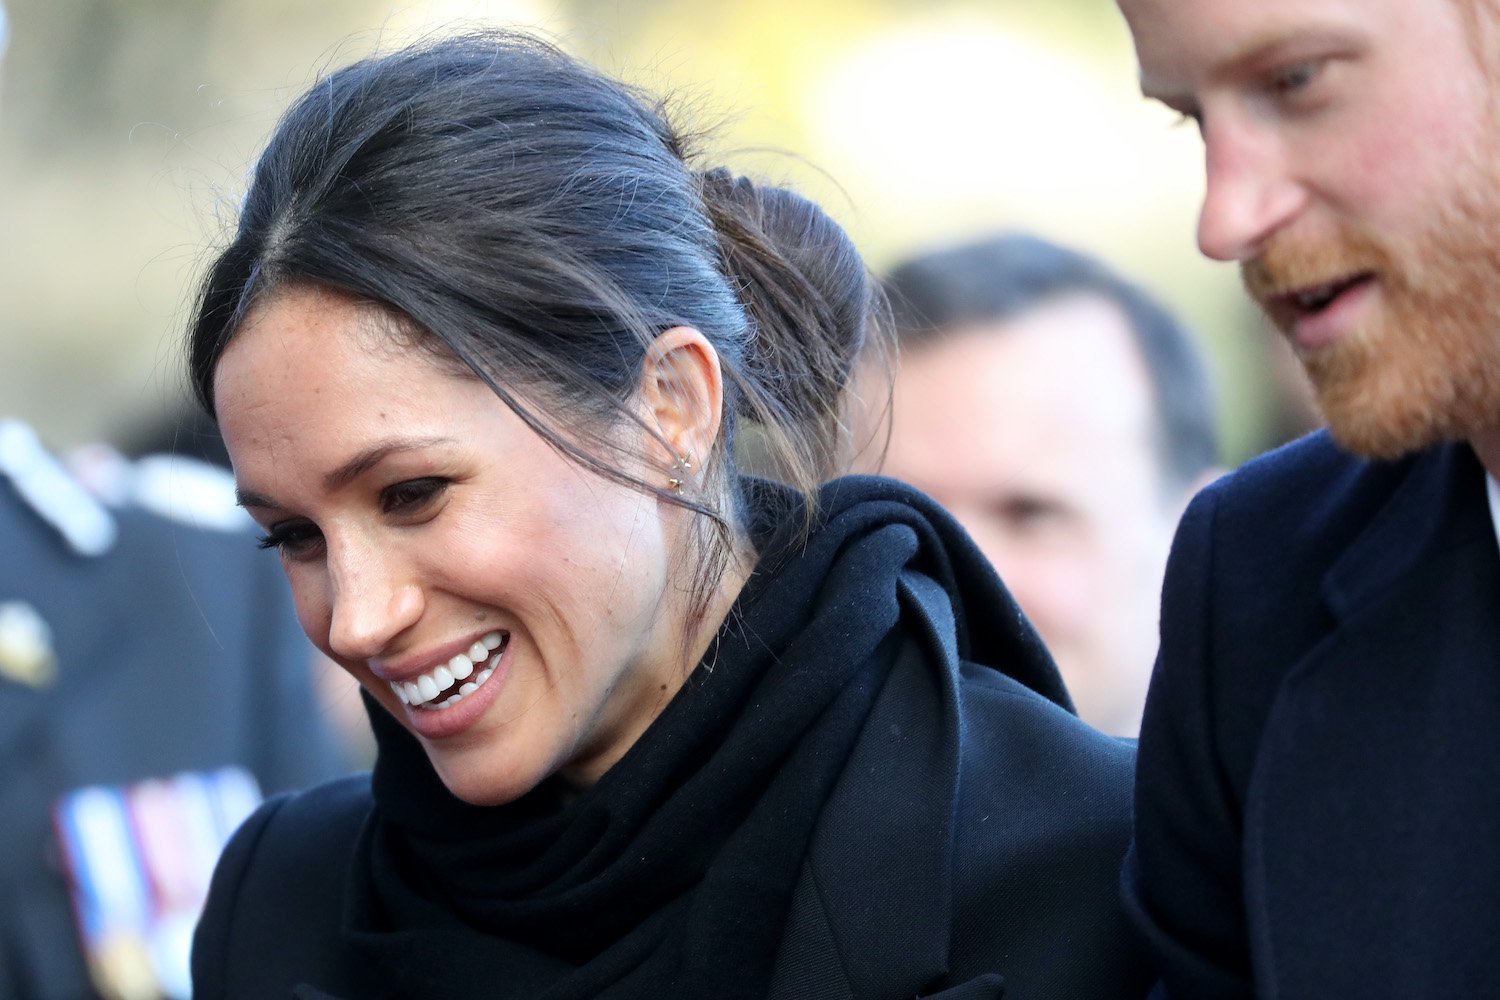 Meghan Markle Wanted ‘Red Carpet Moment’ During Early Appearance With Prince Harry, But He Showed ‘Air of Impatience,’ Body Language Expert Says